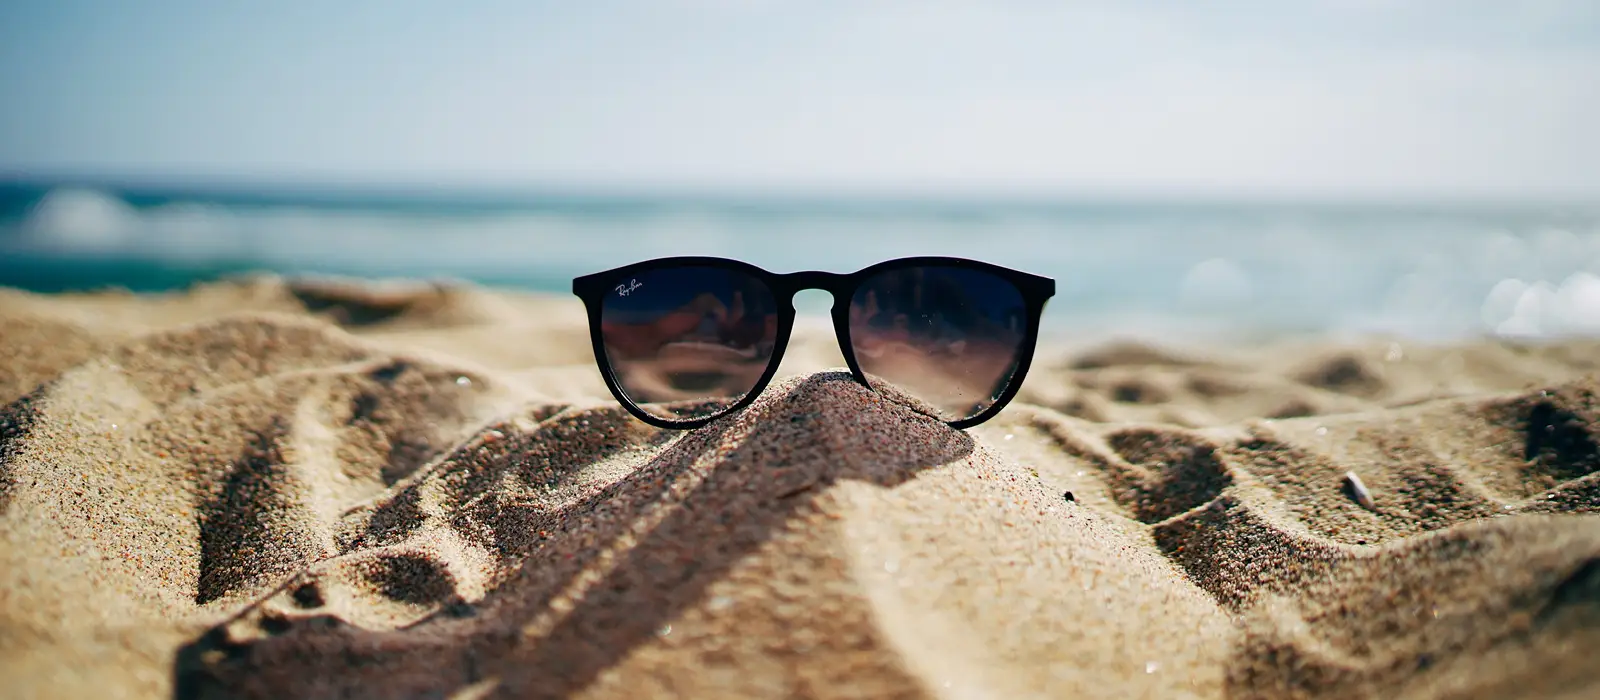 Pair of sunglasses sitting in sand at the beach